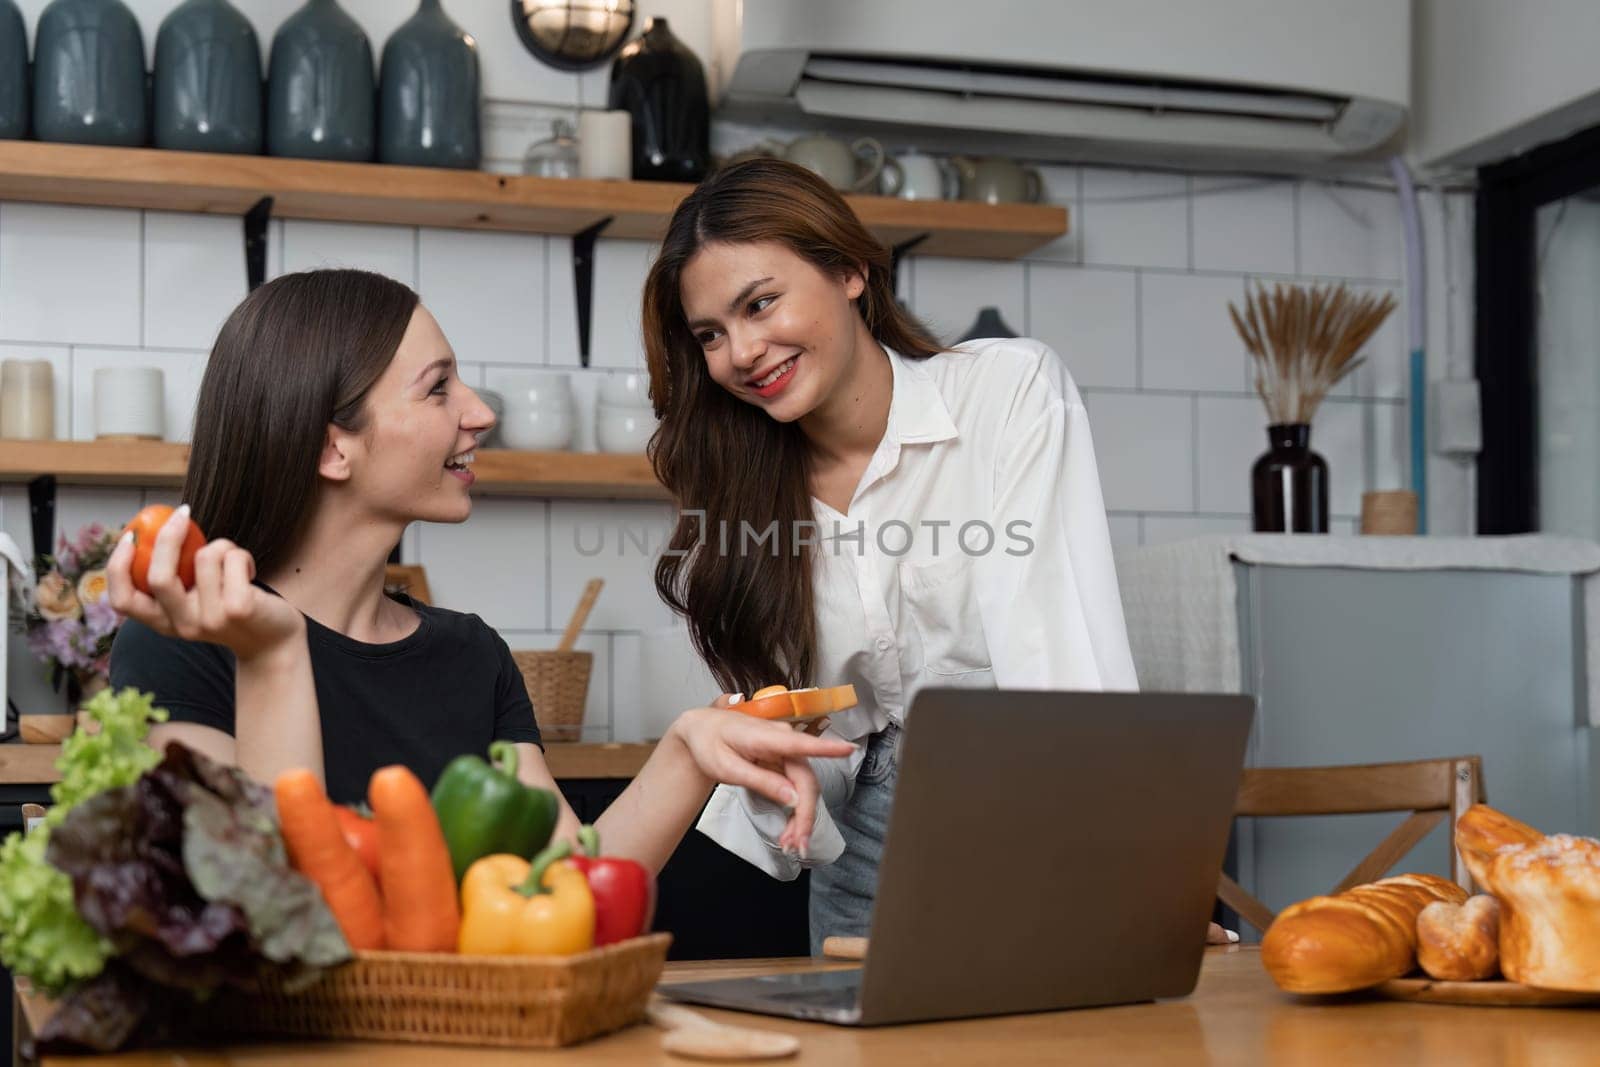 girl chef helping each other to cook healthy food of salad from tasty organic vegetable by learning recipe